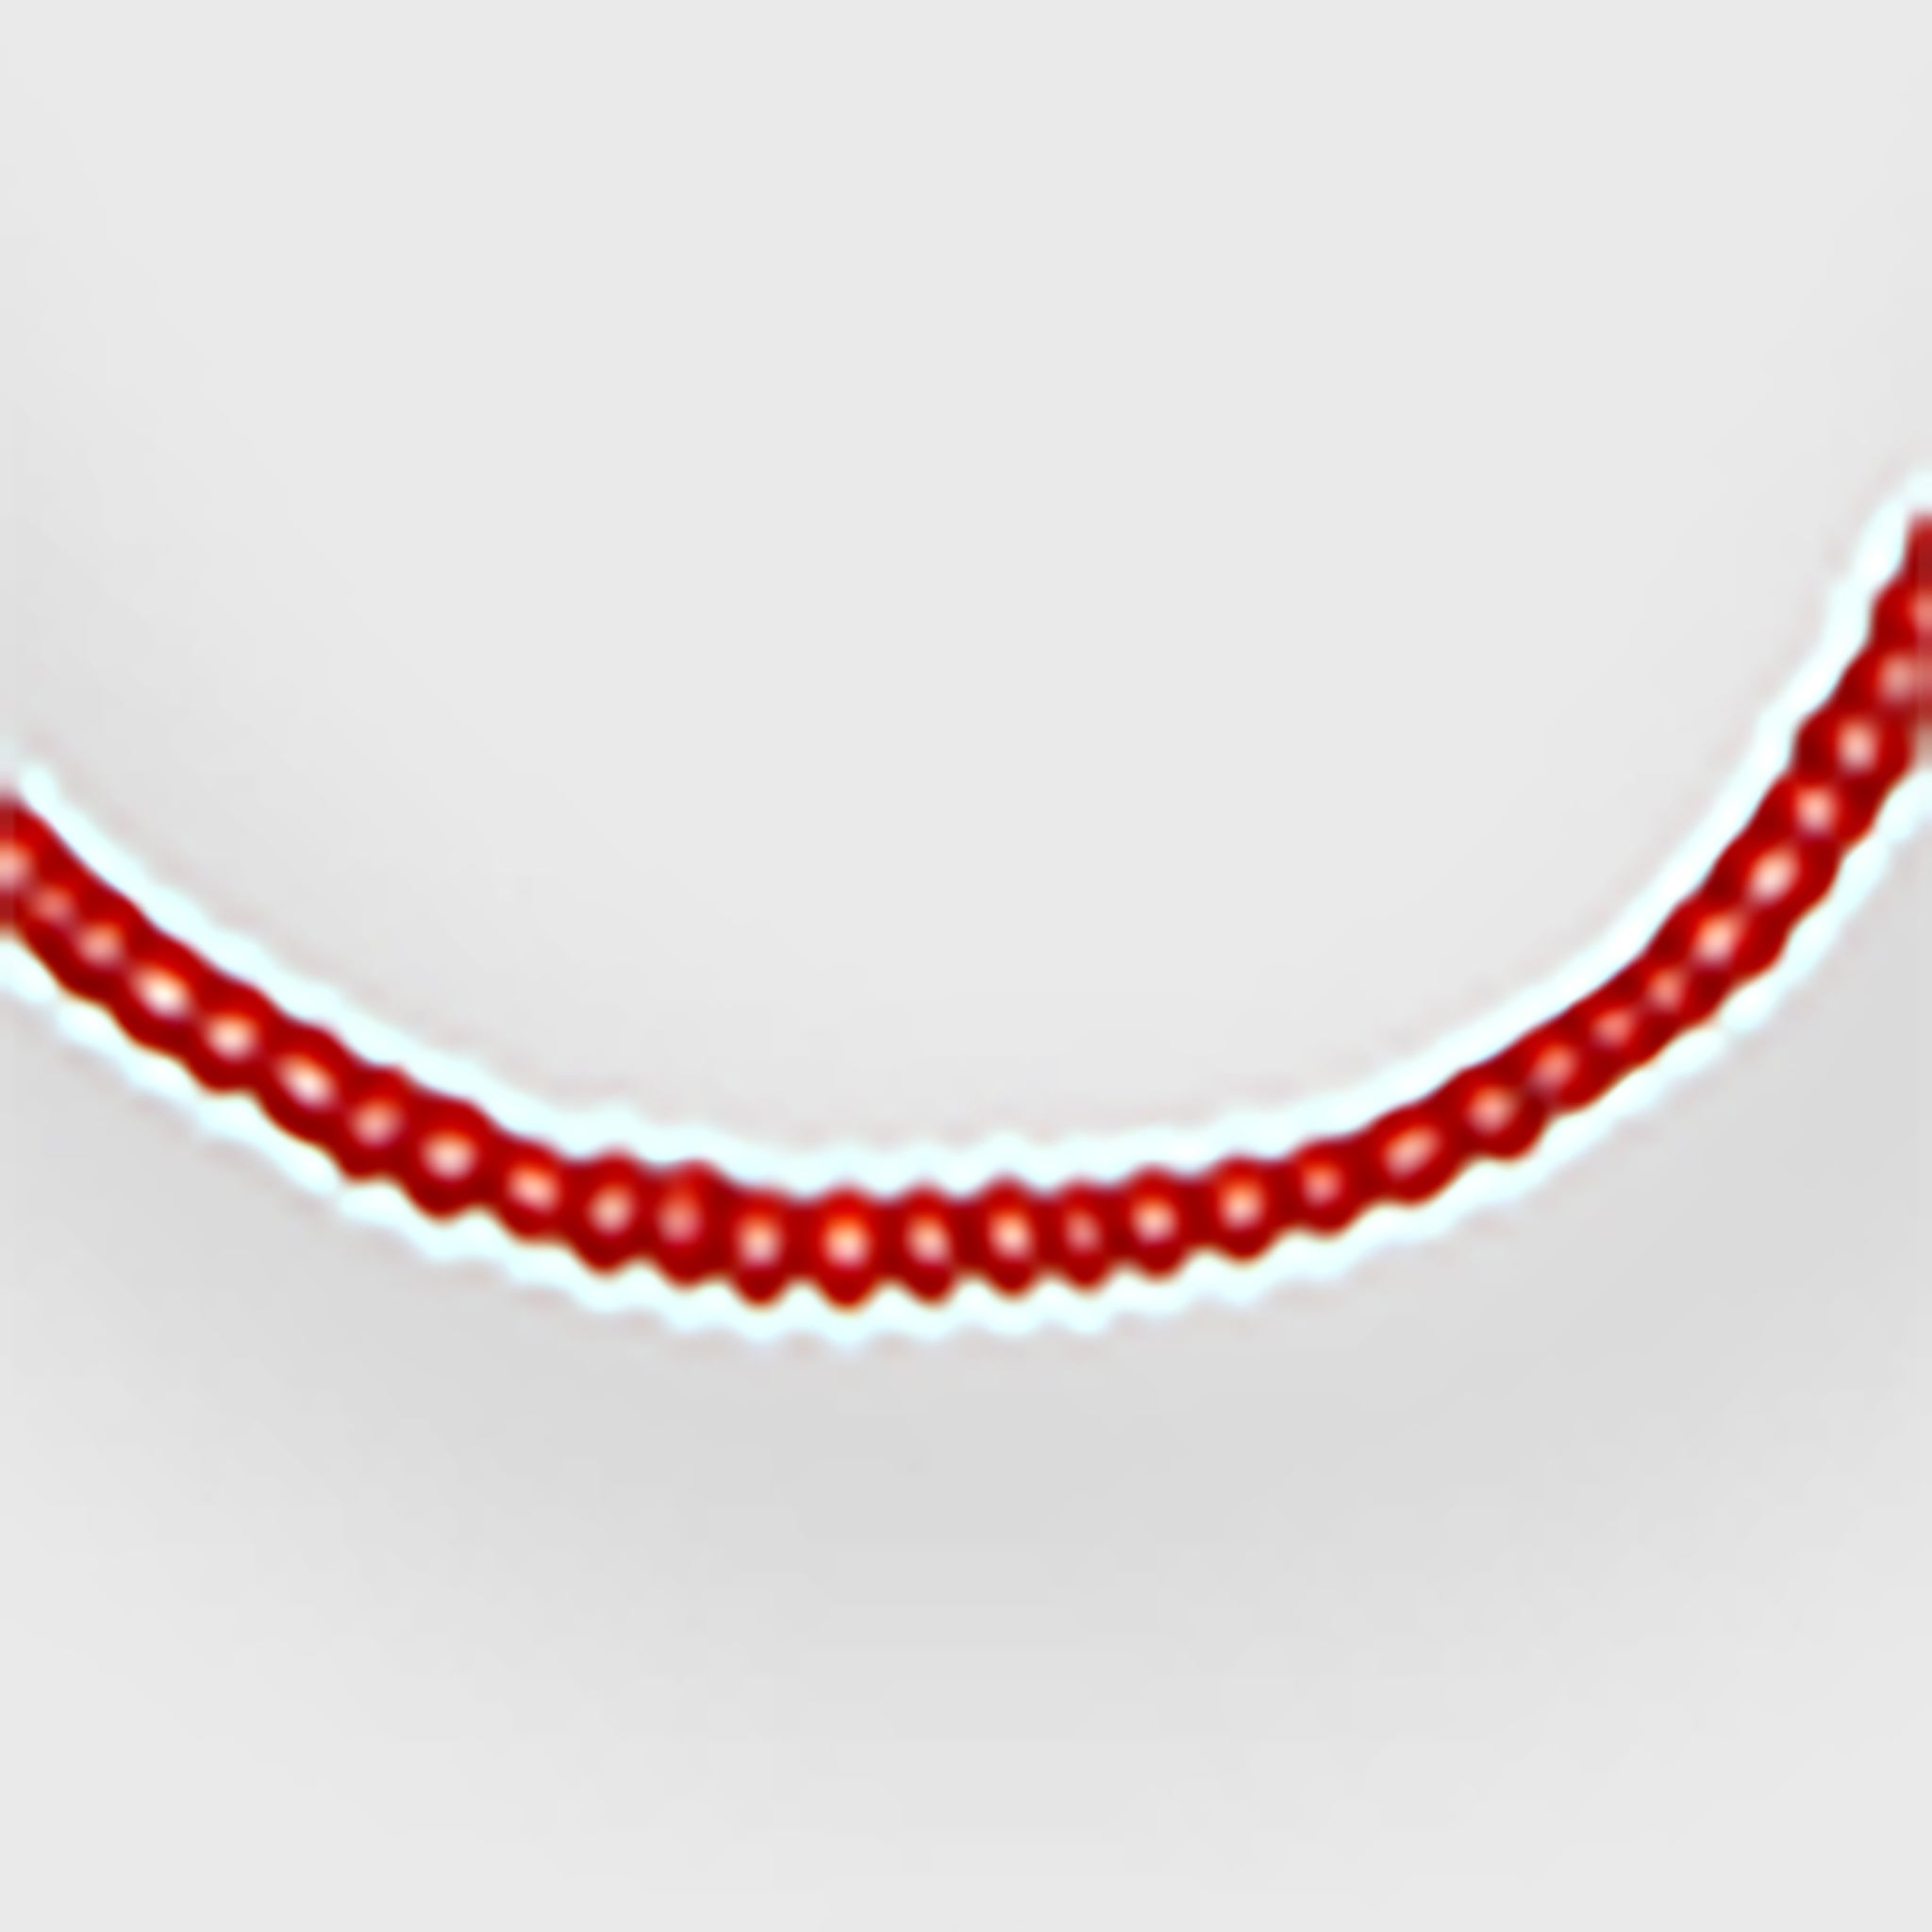 Tiny African Beads in Red